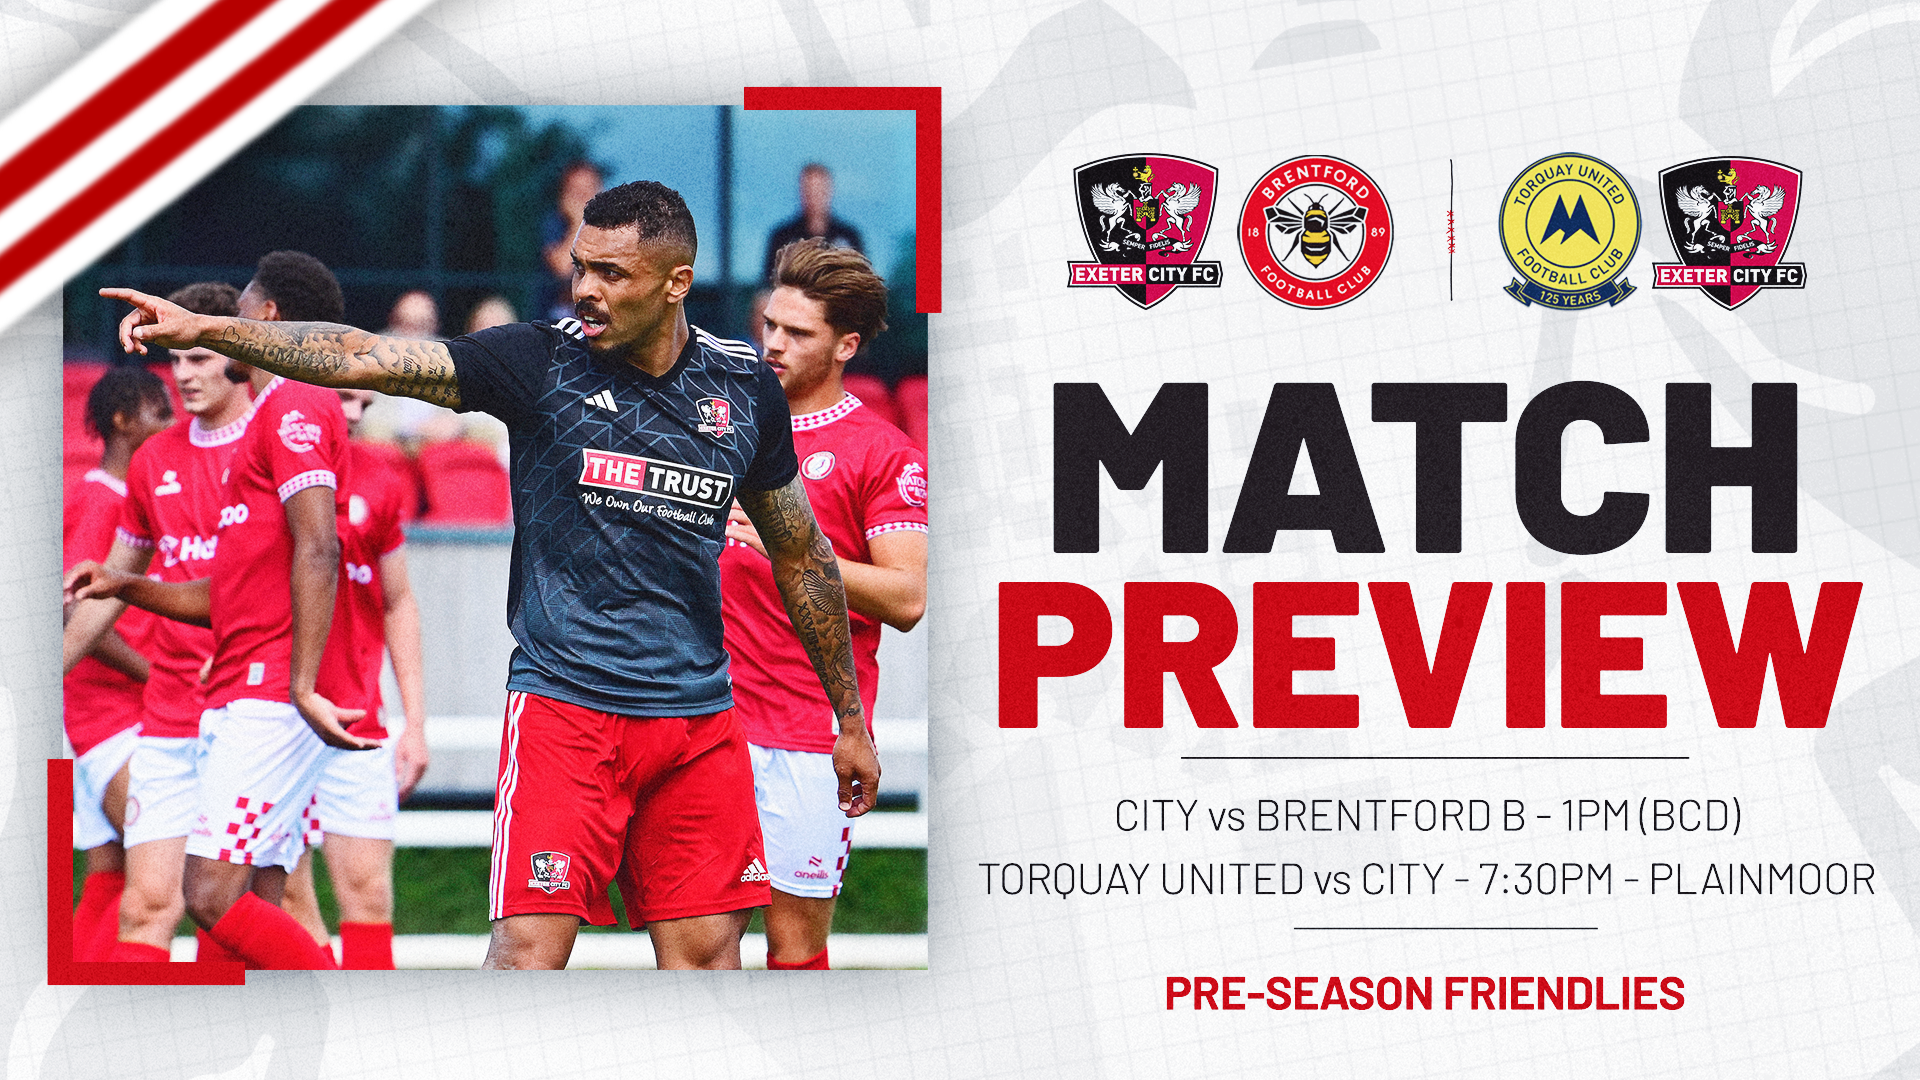 Match Preview for Brentford B and Torquay United